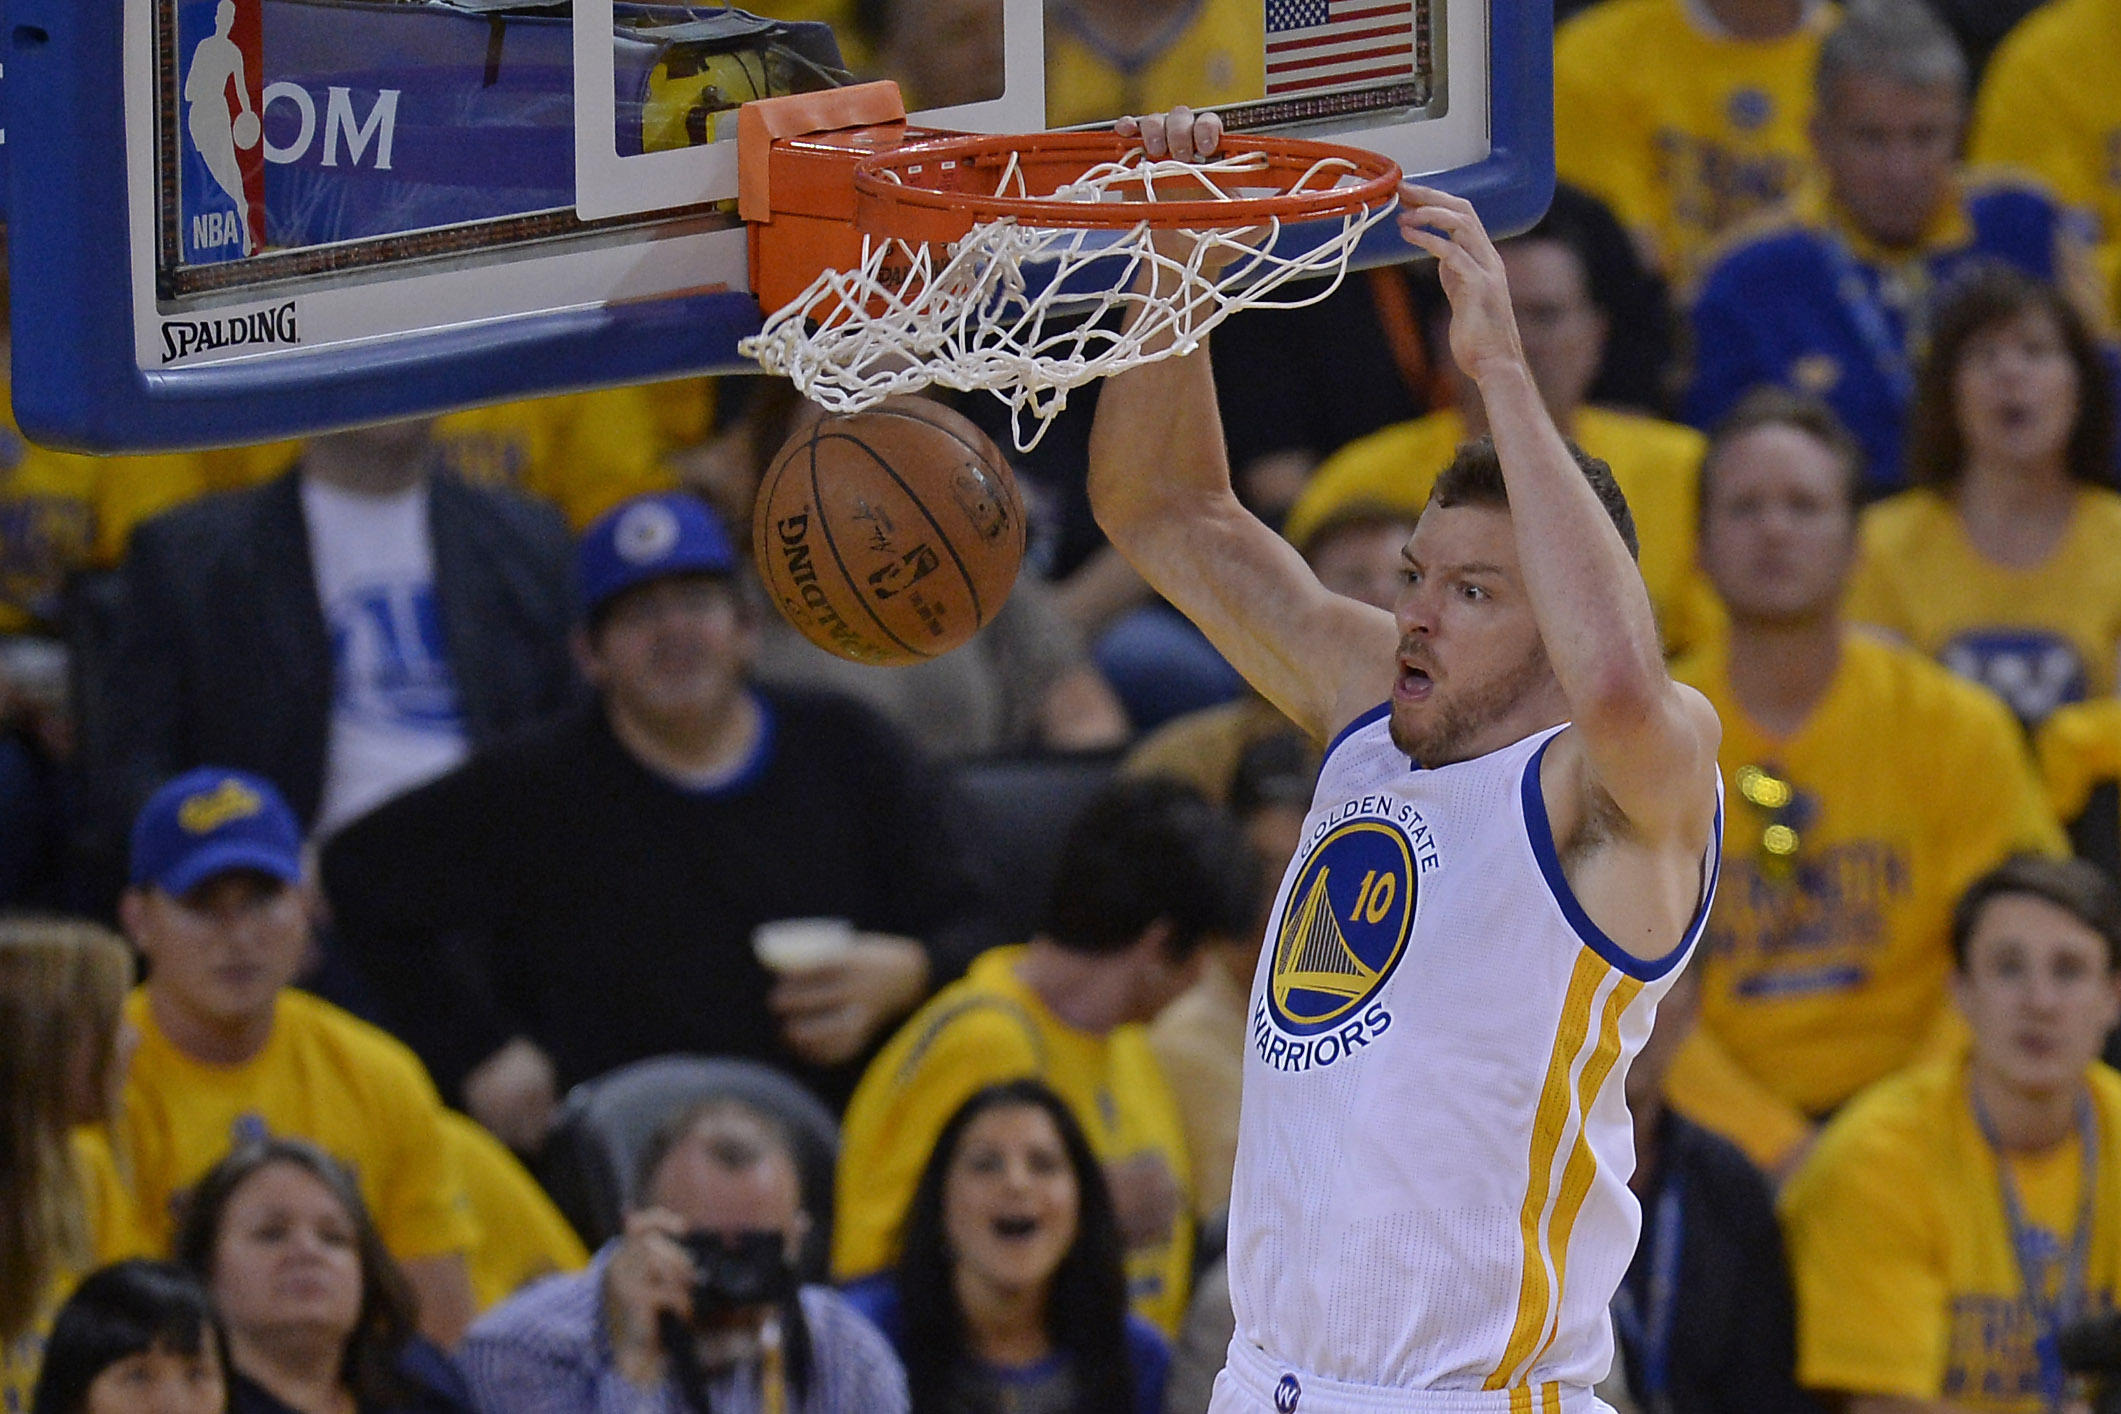 All-Star big man David Lee helped set up the Golden State Warriors' dynasty when he joined the team in 2010. What is Lee doing in retirement?